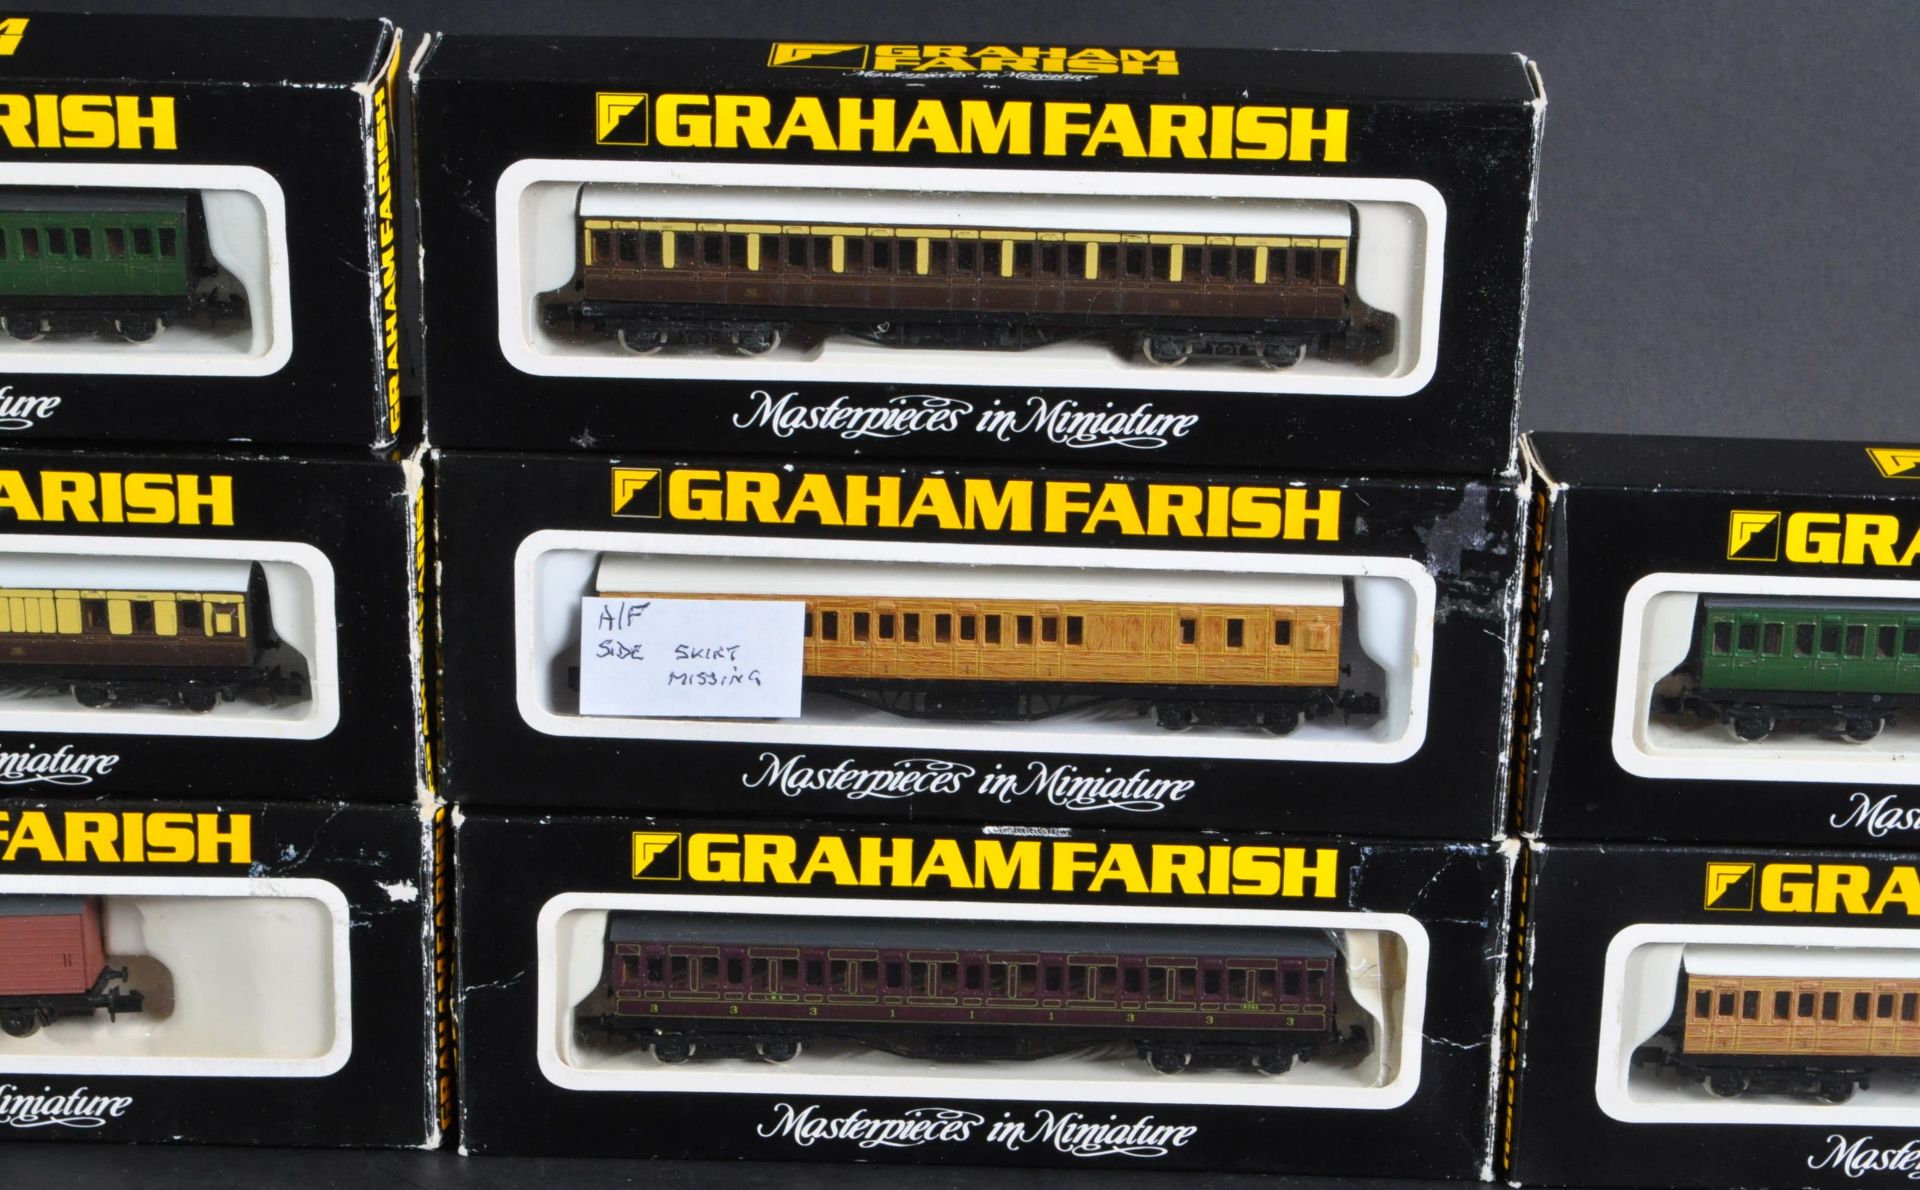 COLLECTION OF GRAHAM FARISH N GAUGE MODEL RAILWAY CARRIAGES - Image 4 of 5